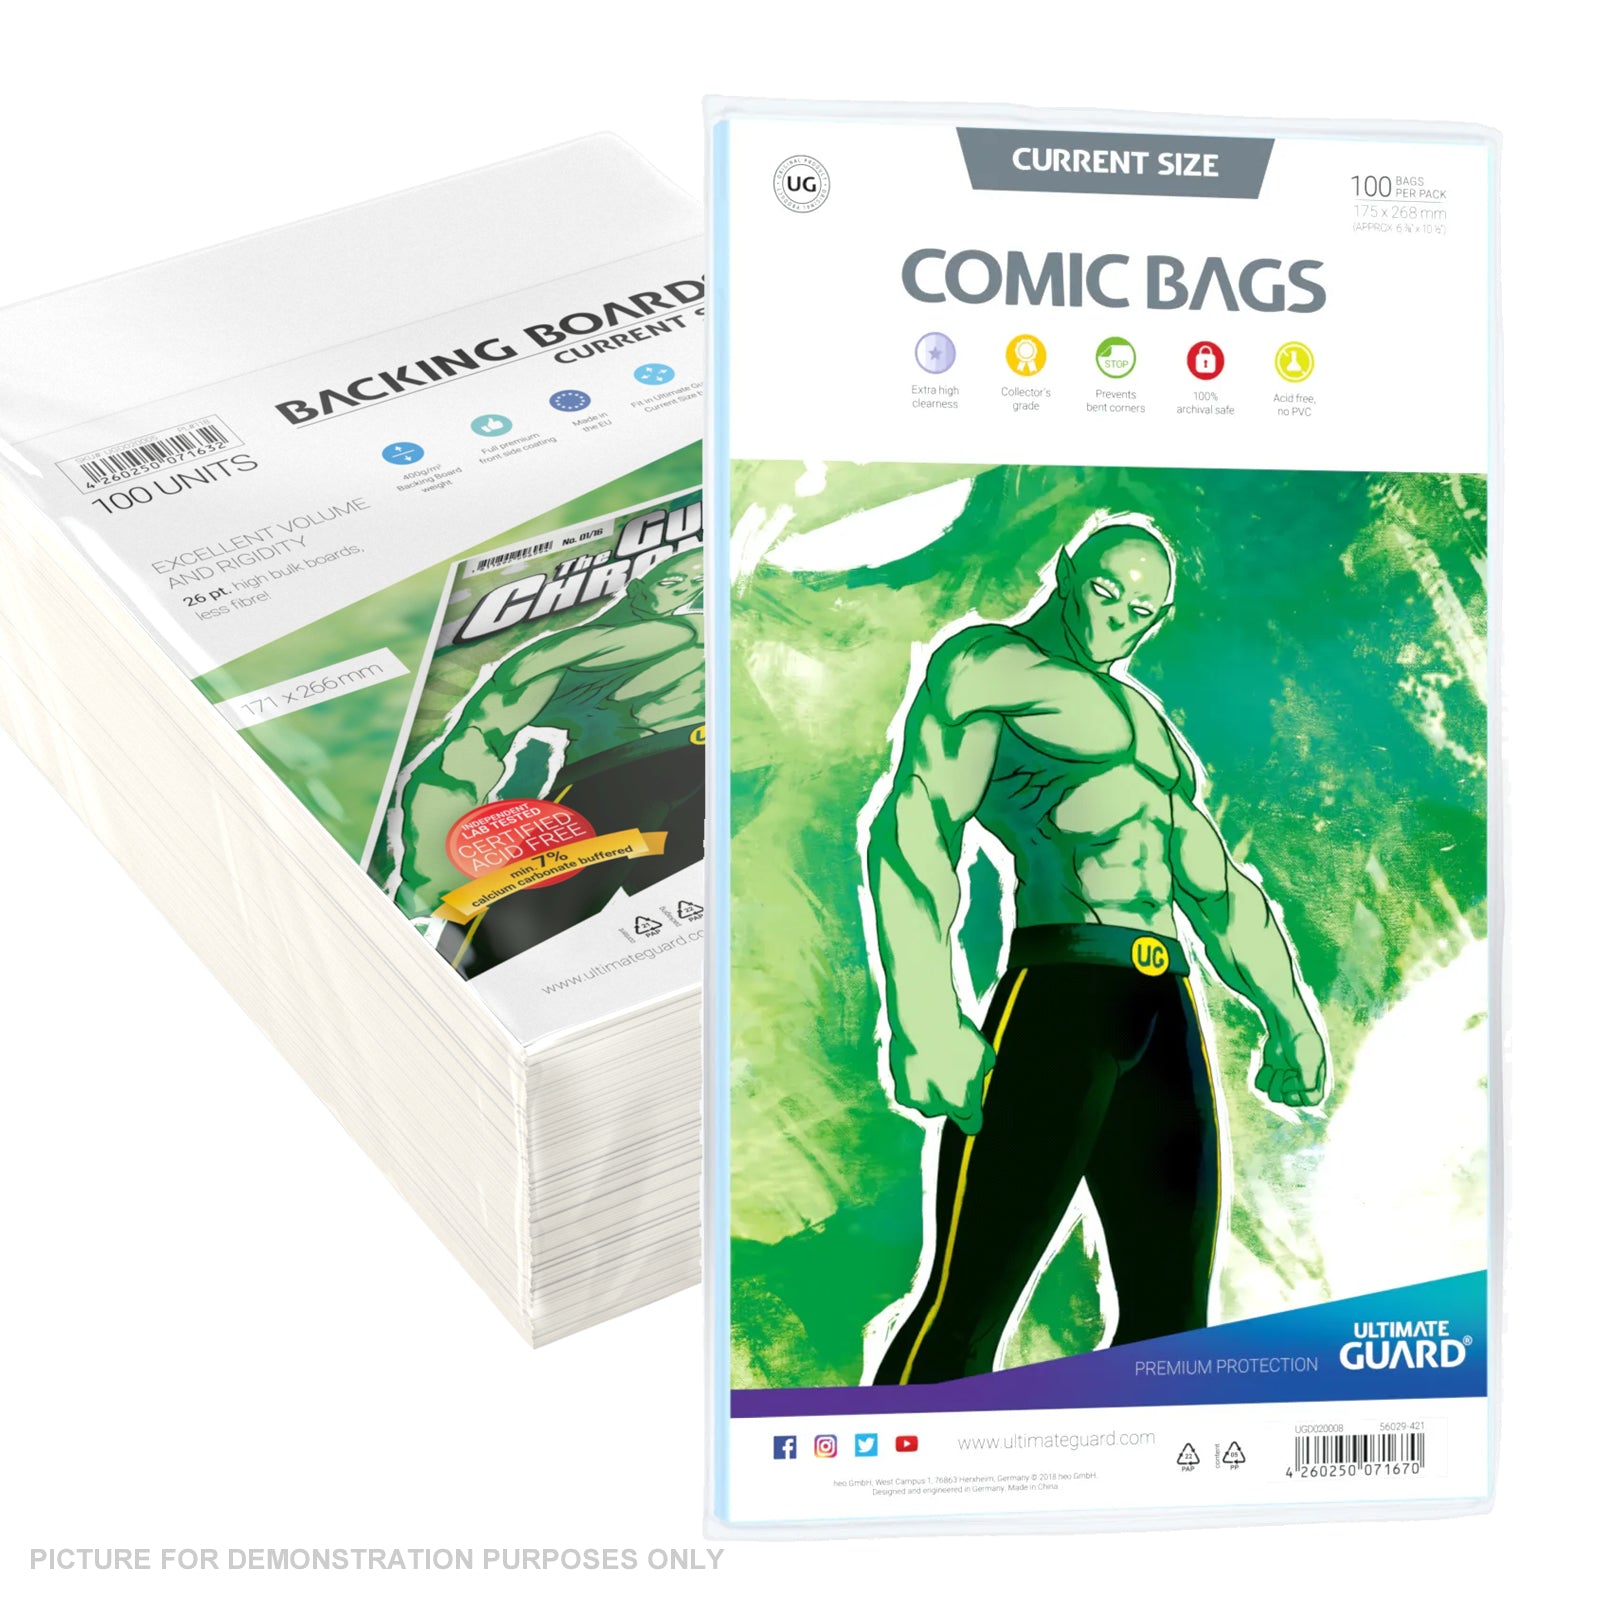 COMIC COMBO - ULTIMATE GUARD - Standard CURRENT Size Comic Bags & Backing Boards x 100